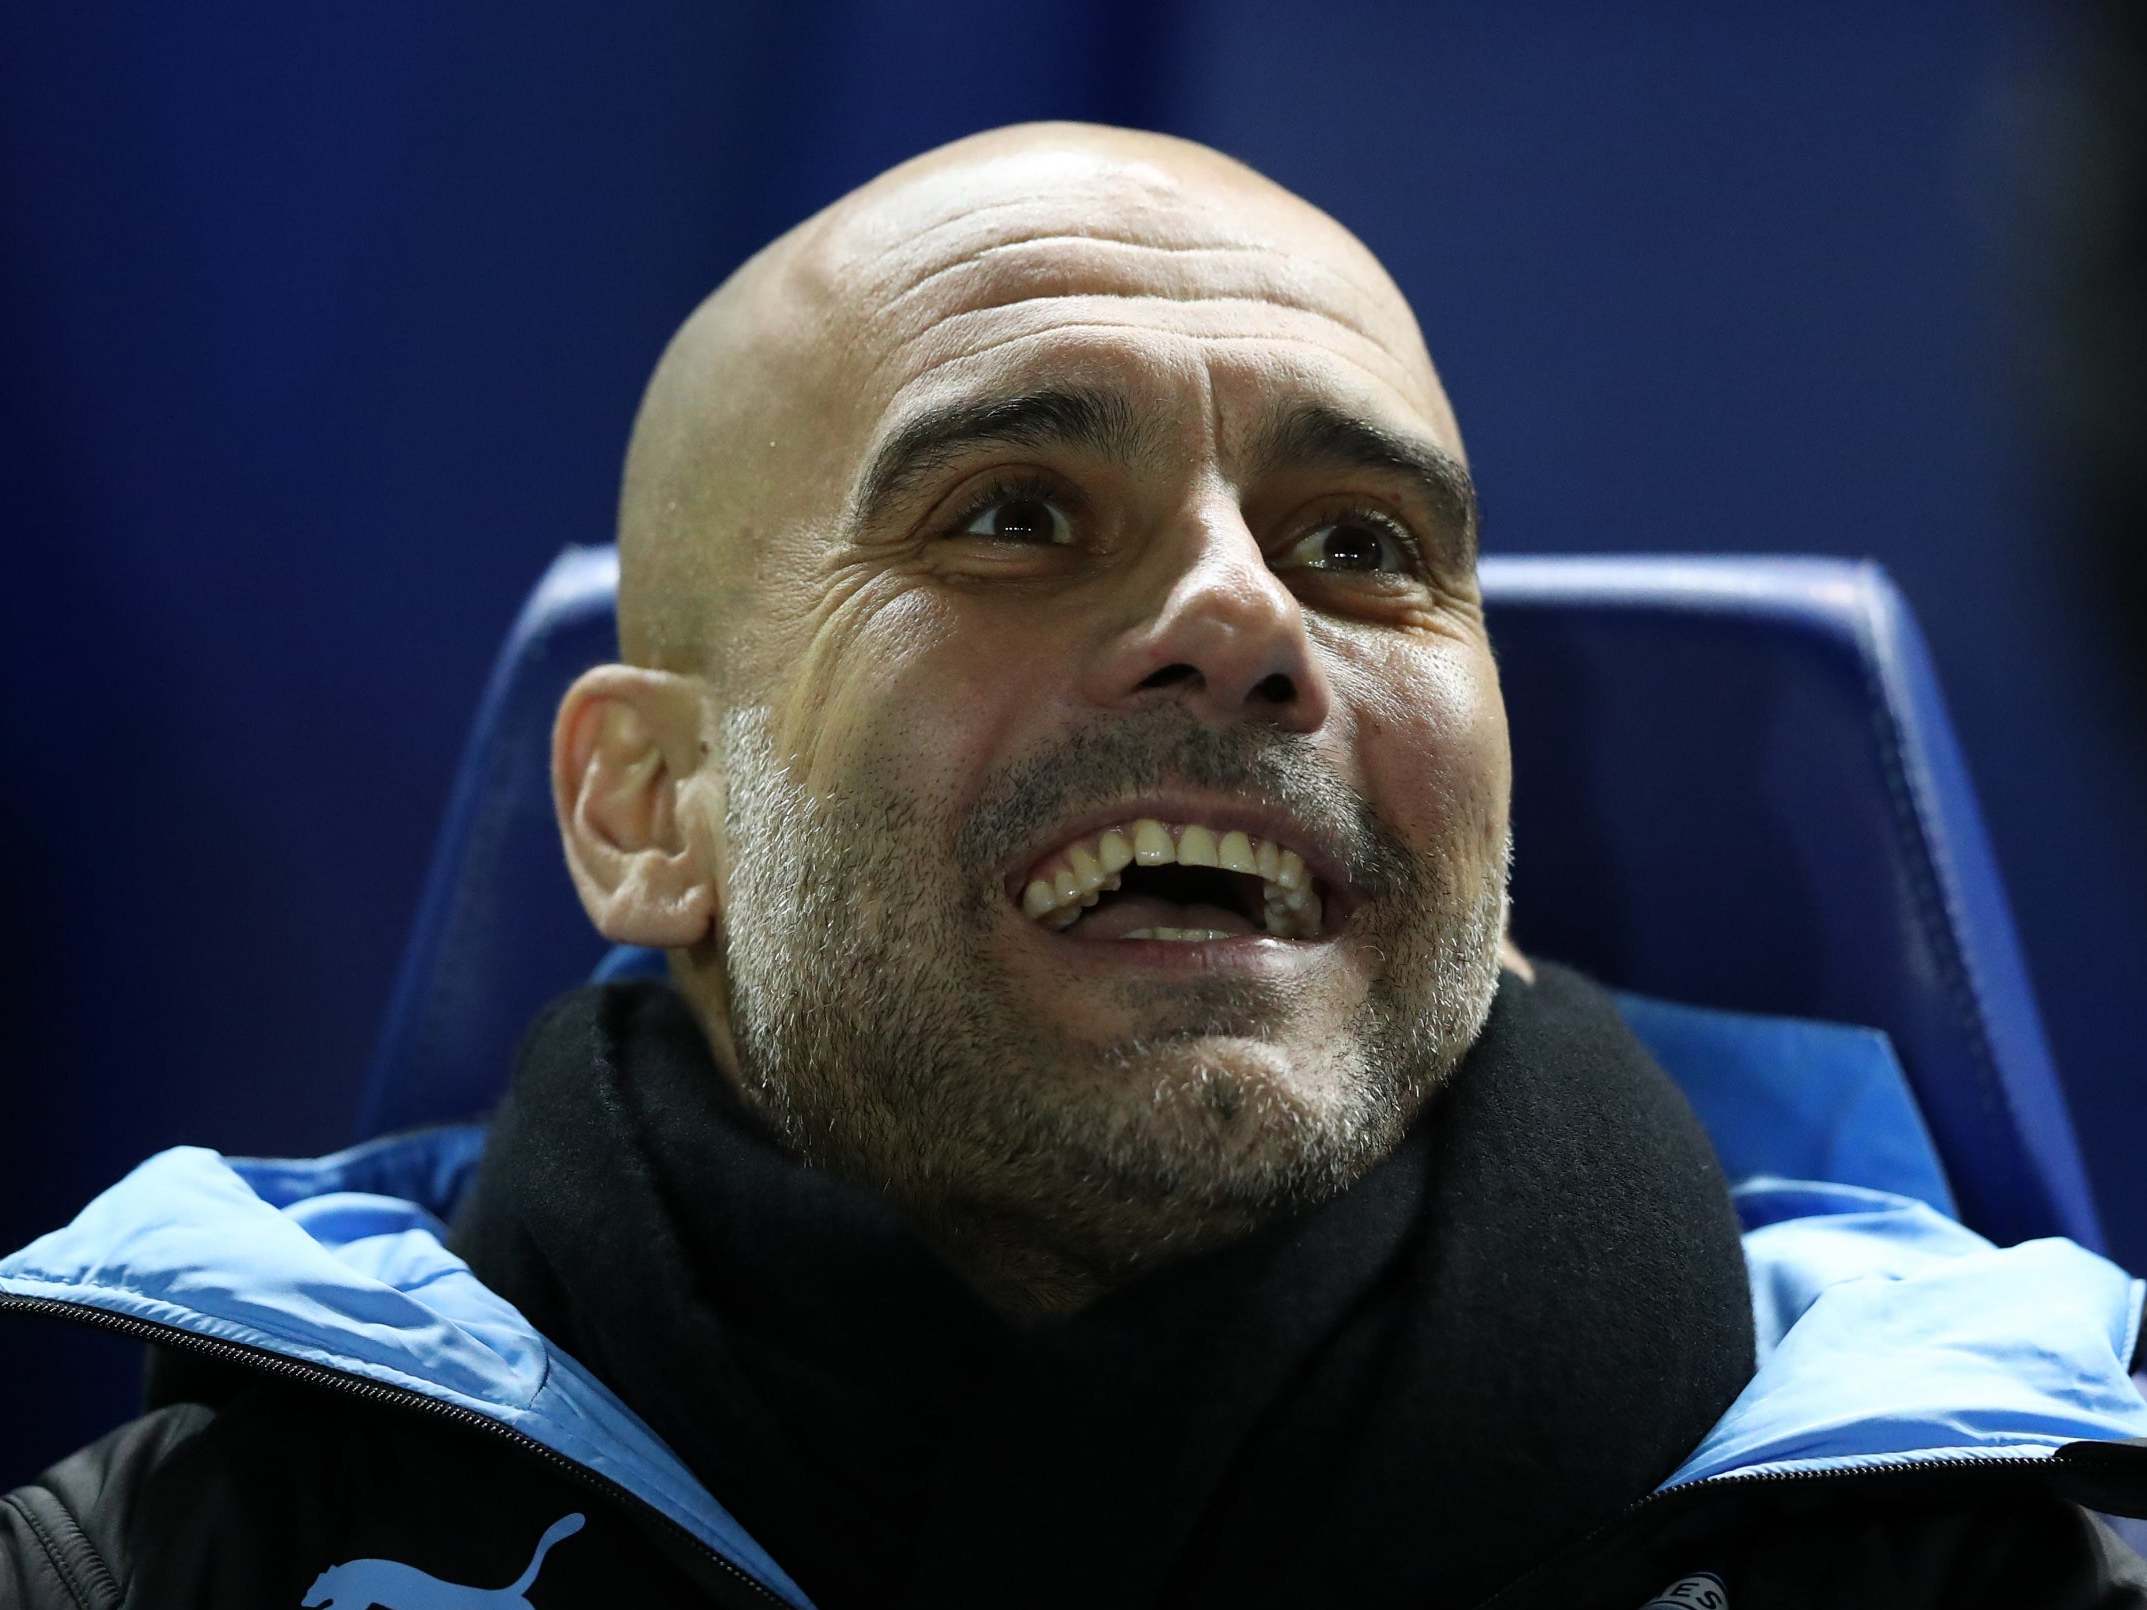 Pep Guardiola has inspired City in recent weeks